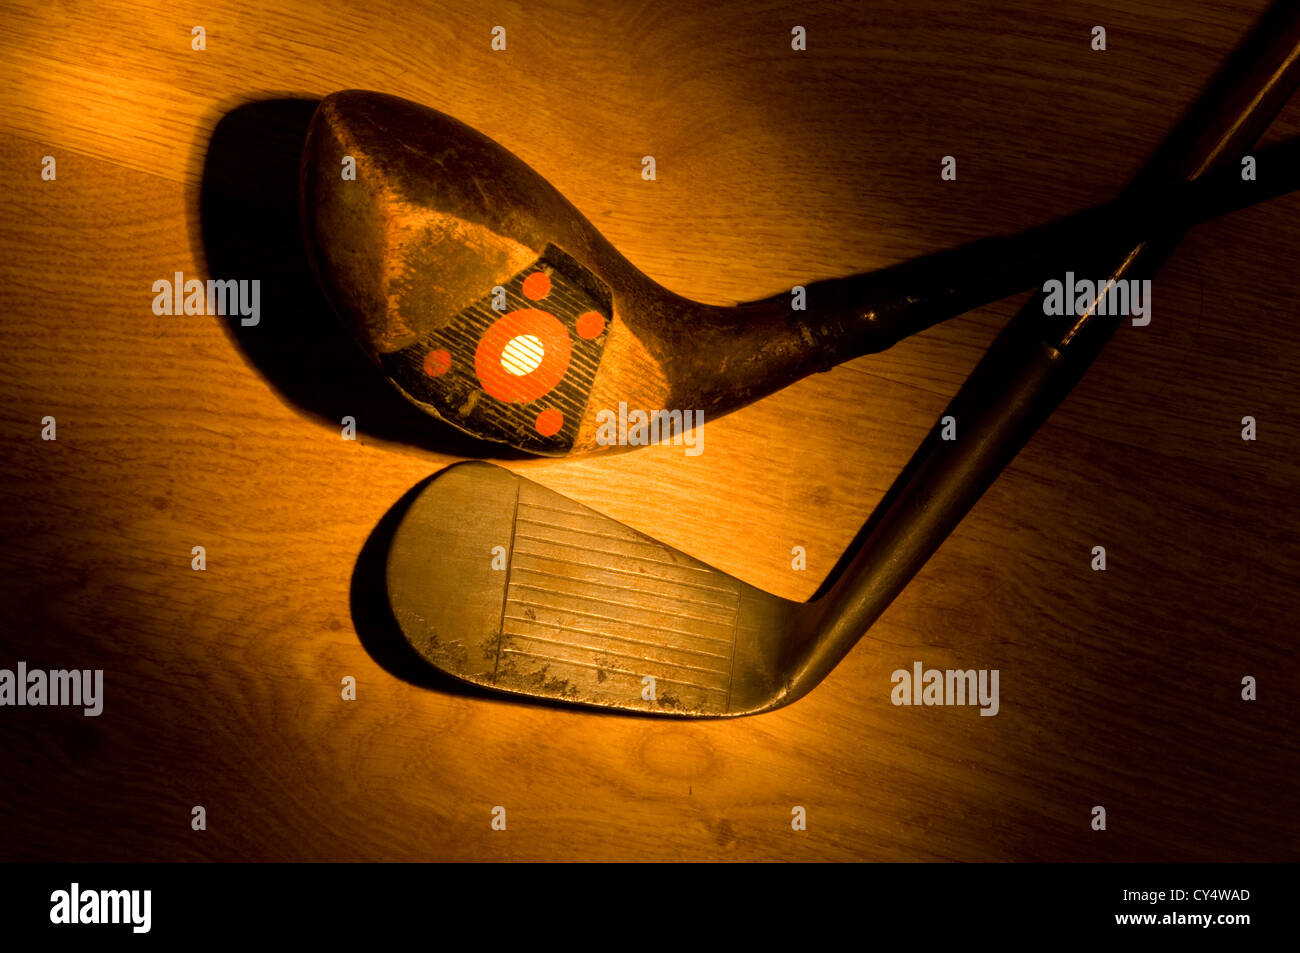 Old, vintage, antique golf clubs painted with light from a flashlight Stock Photo